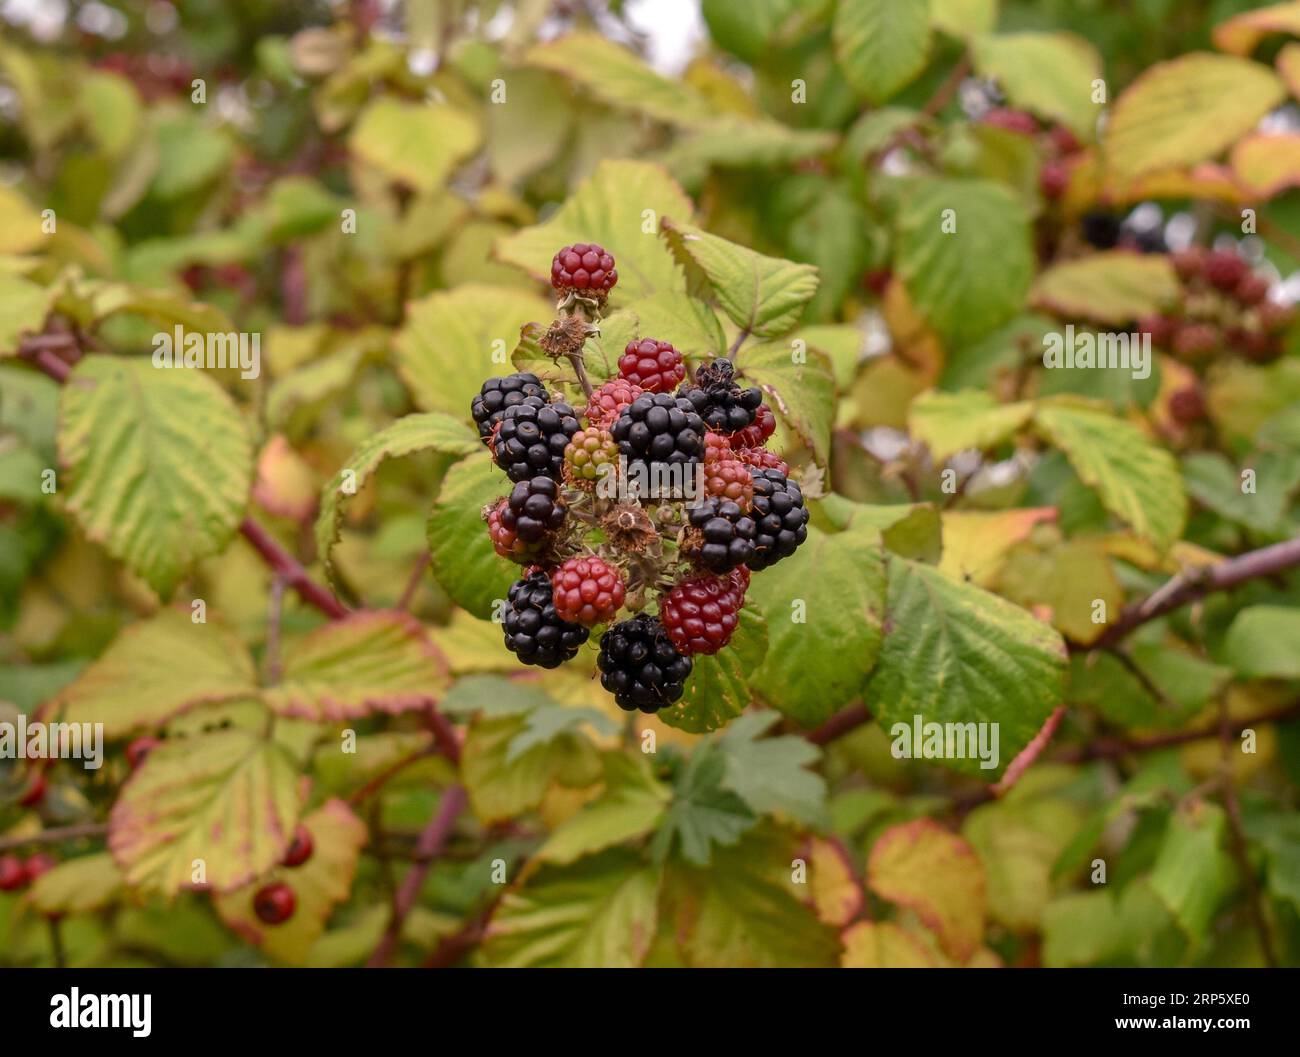 A small bunch of Blackberries growing on Bramble bush in Wales. Stock Photo